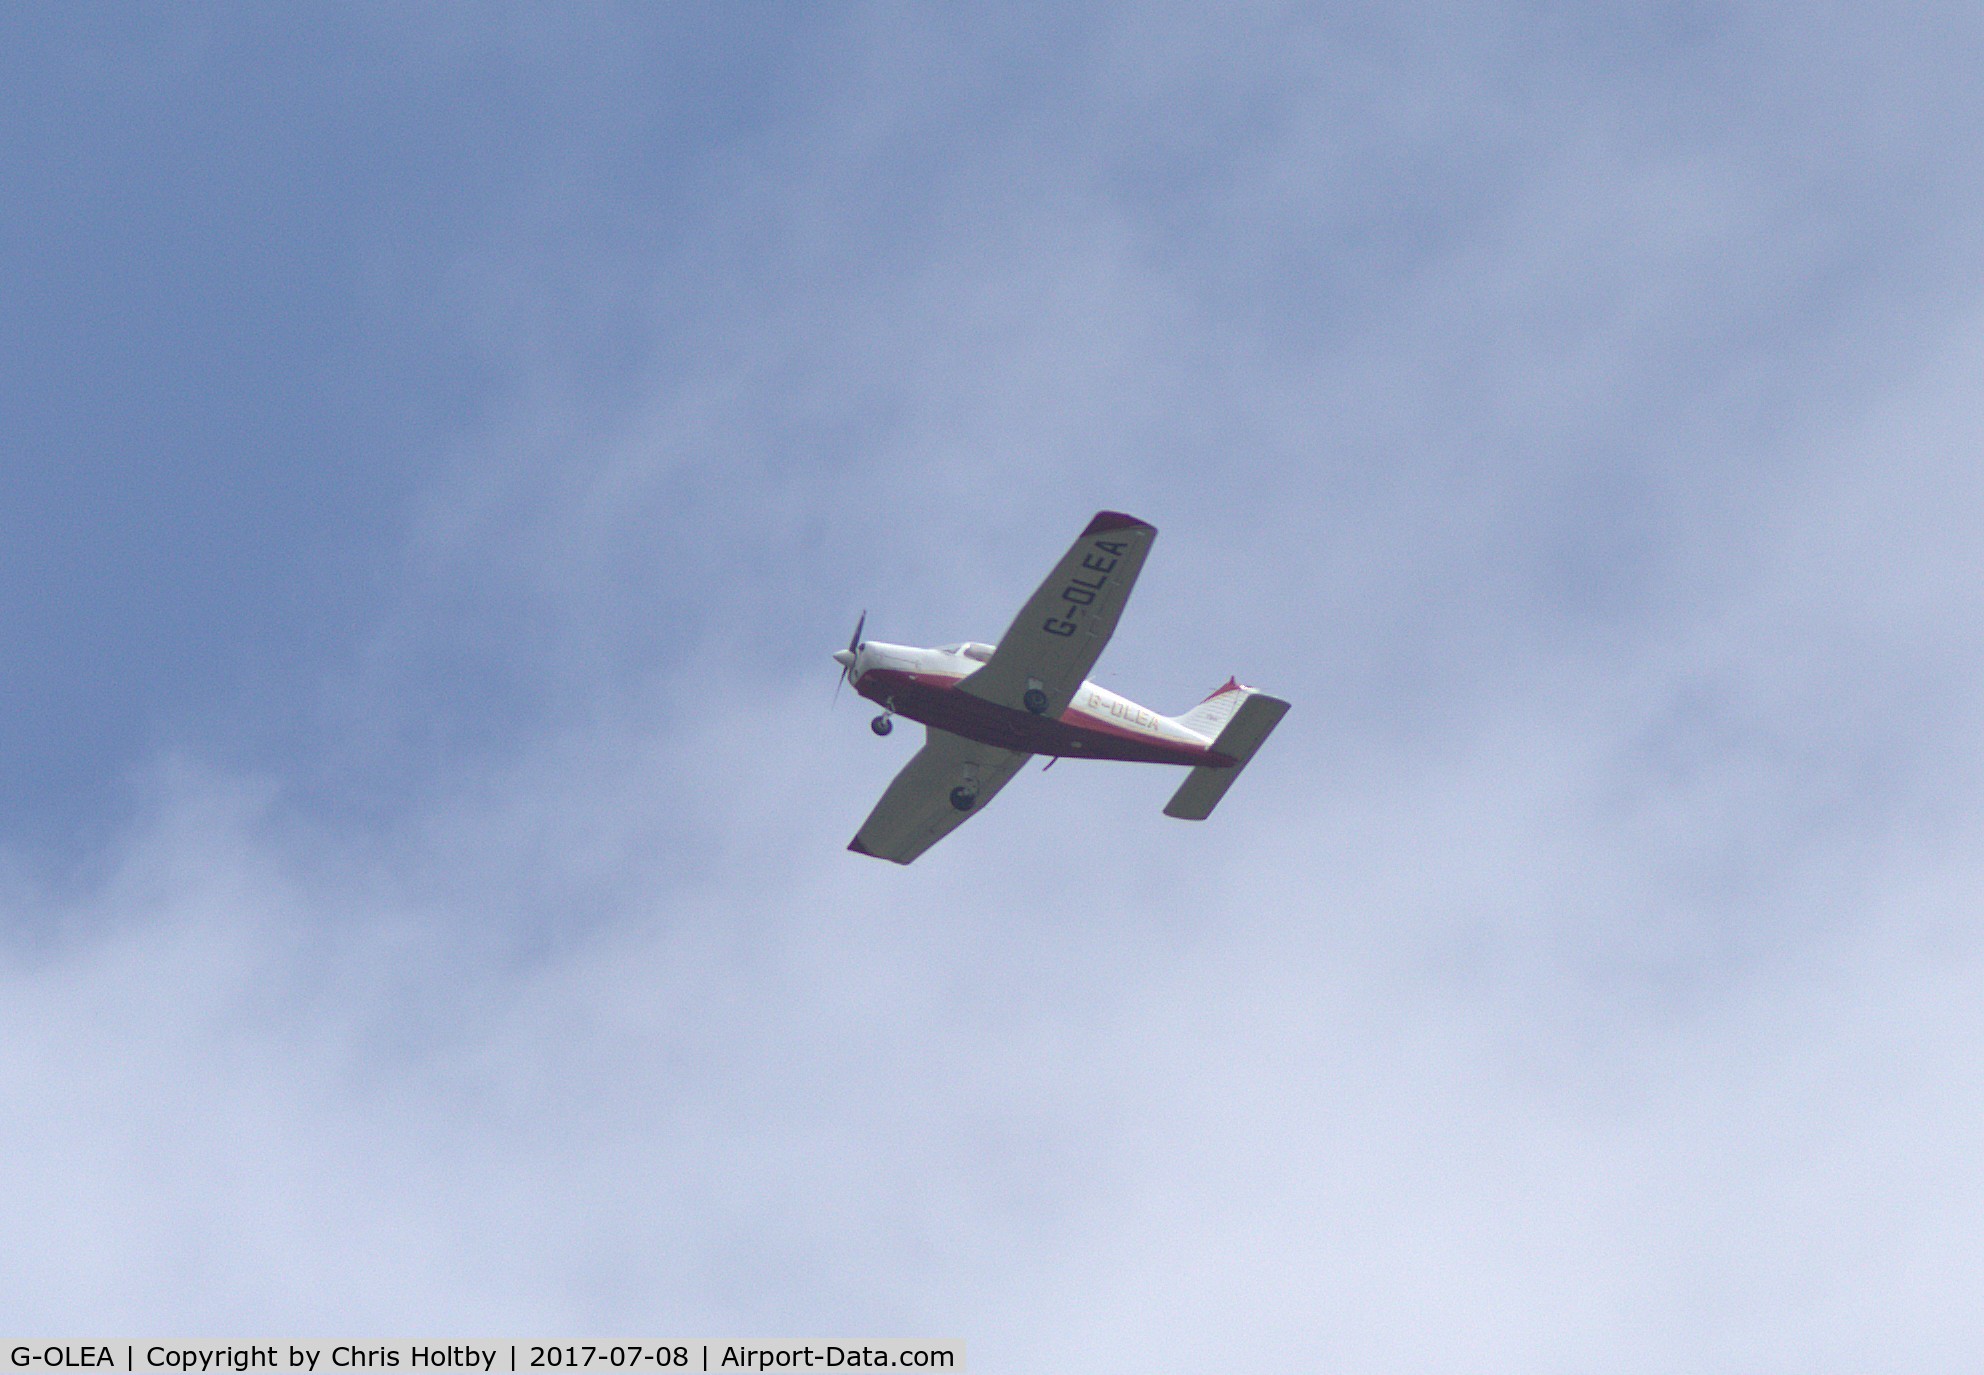 G-OLEA, 1974 Piper PA-28-151 Cherokee Warrior C/N 28-7415457, Over Potters Bar from Elstree, Herts